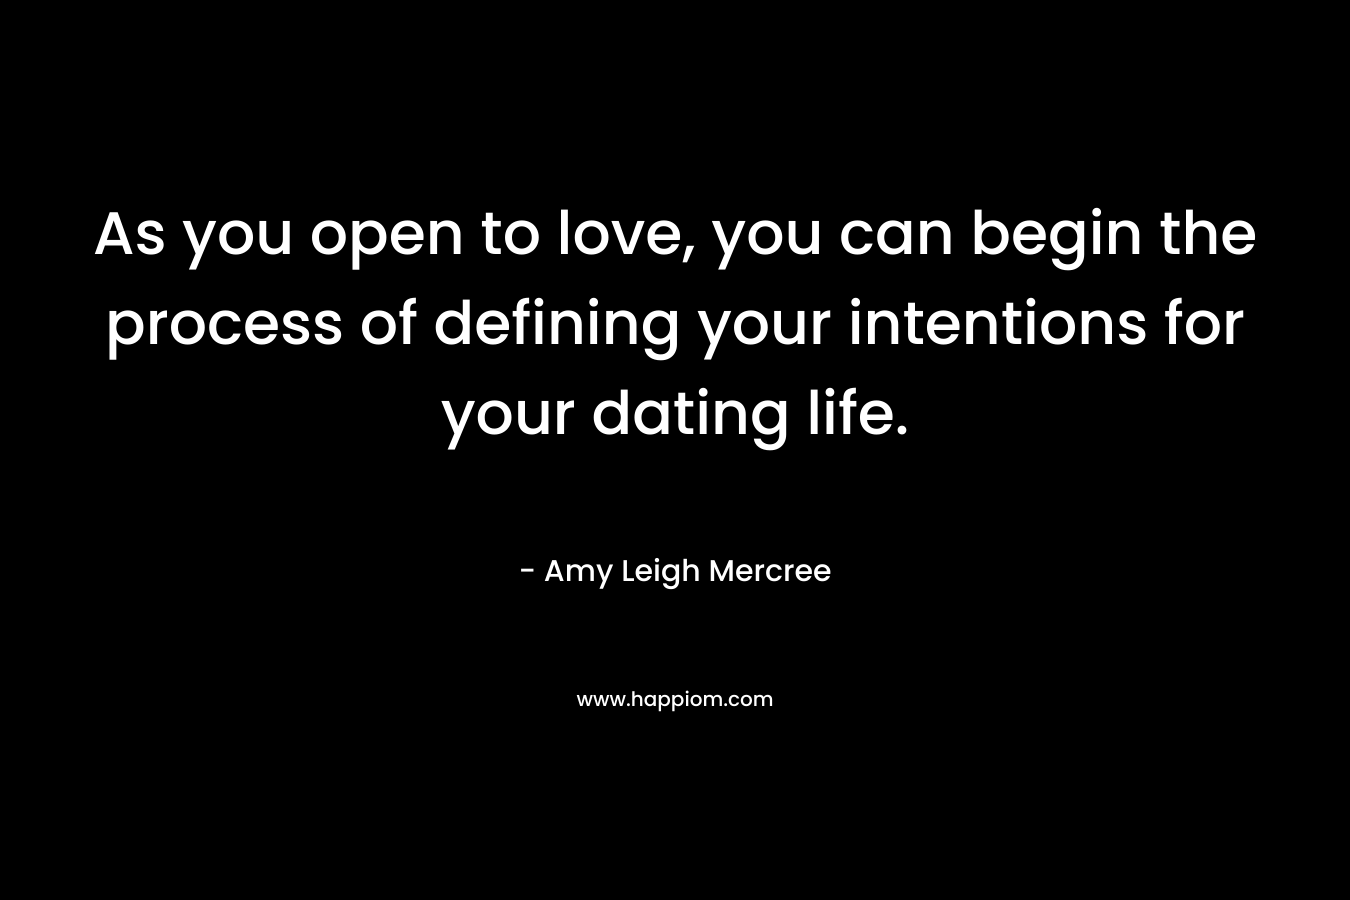 As you open to love, you can begin the process of defining your intentions for your dating life. – Amy Leigh Mercree